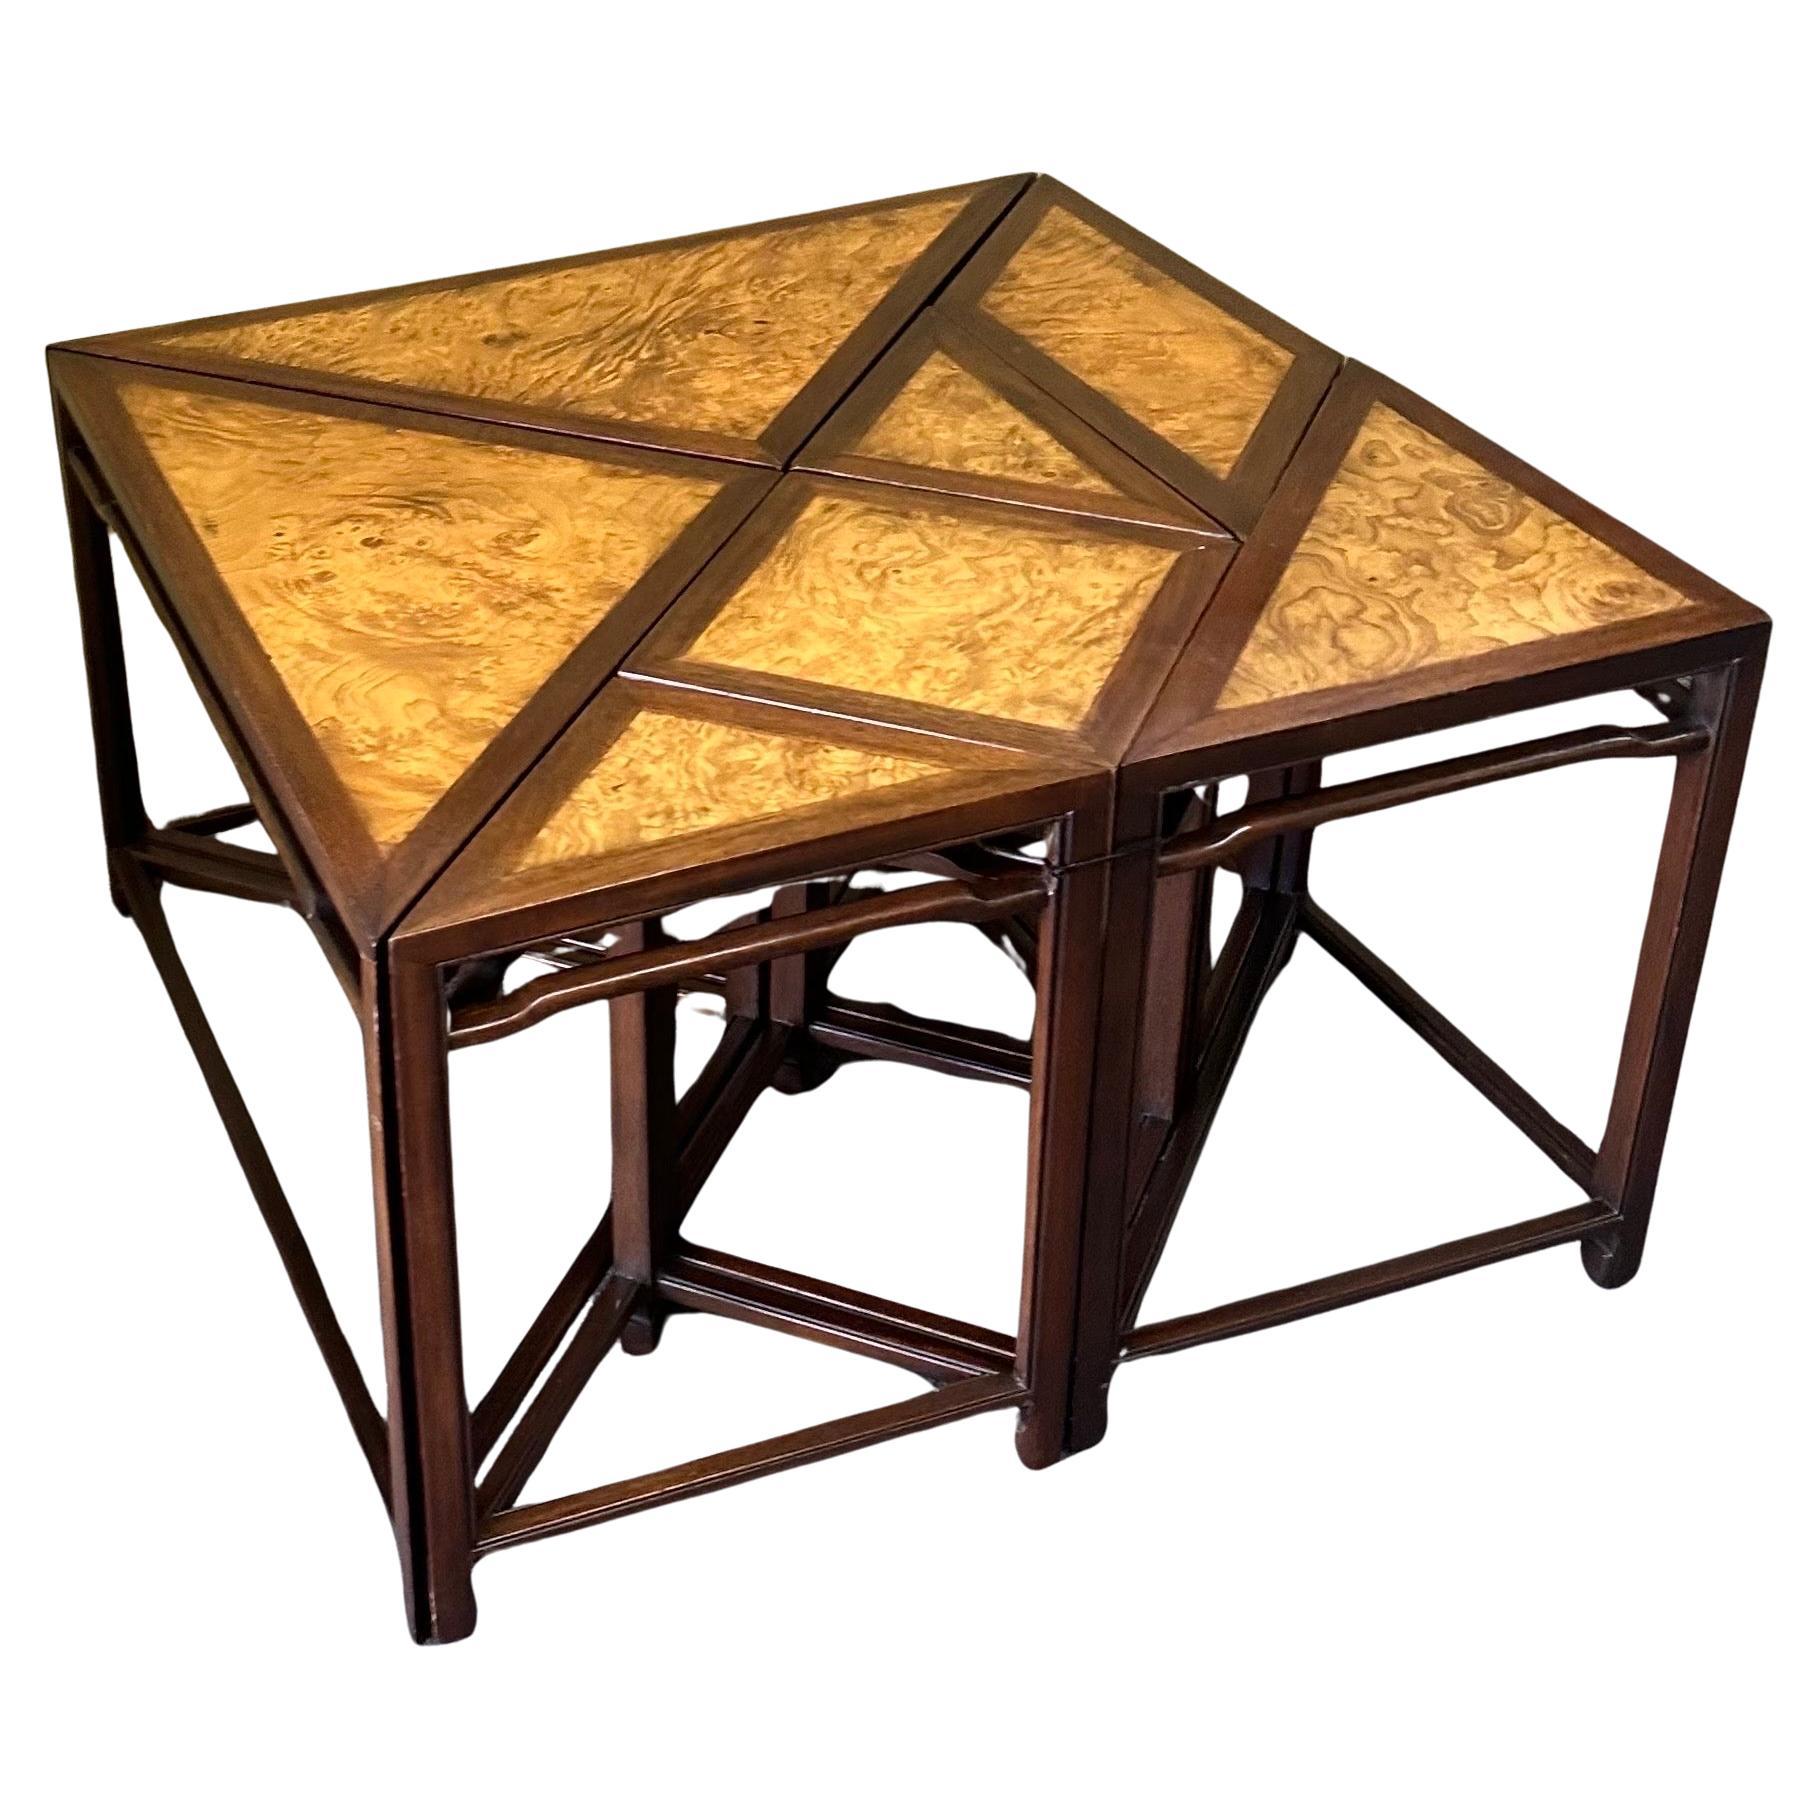 Seven Piece Burlwood "Tangram" Geometric Puzzle Coffee Table by Baker Furniture